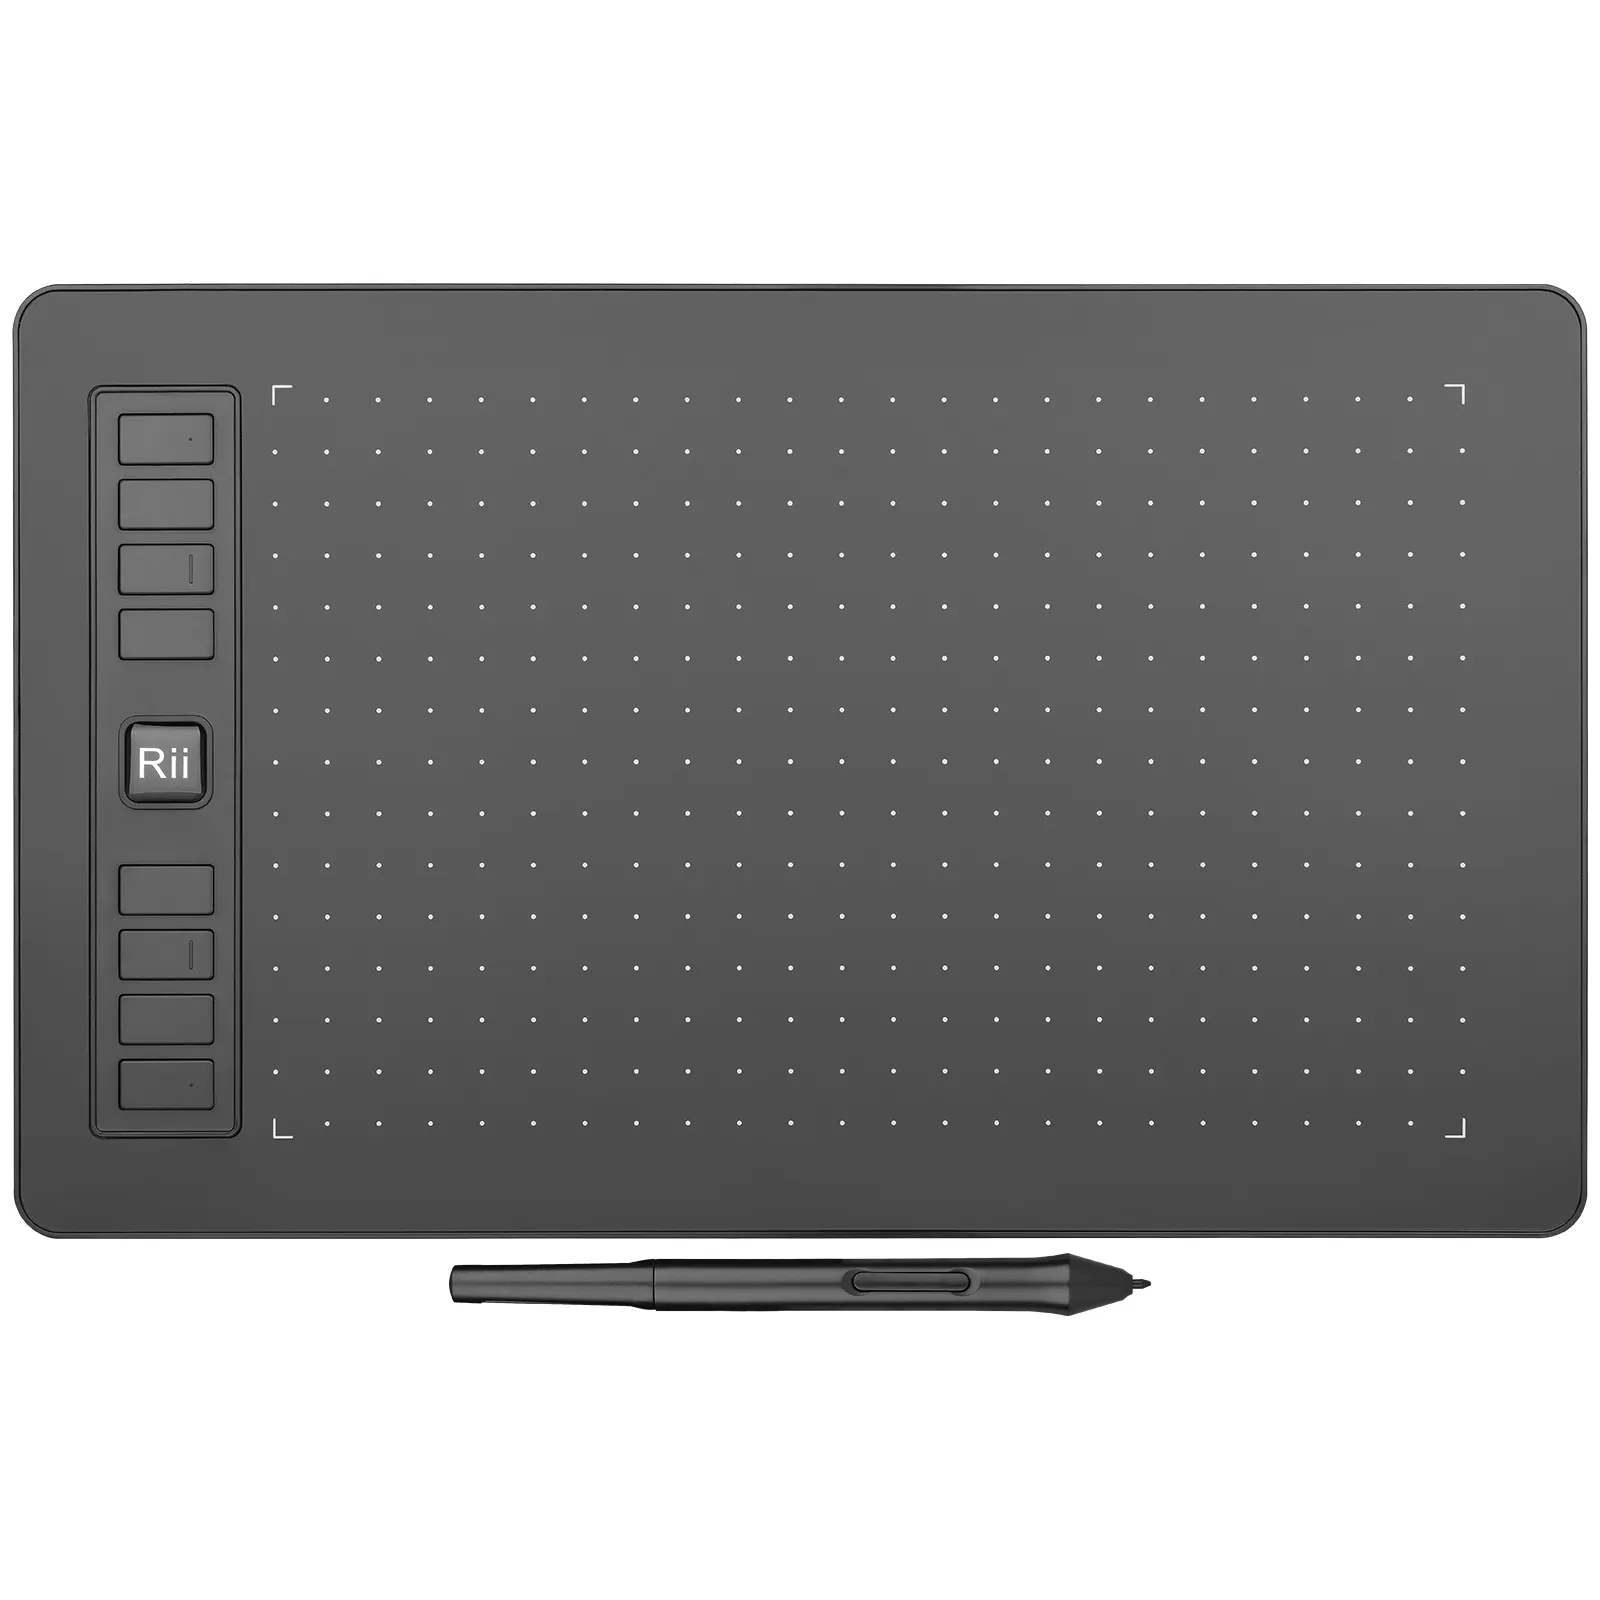 Rii Graphics Drawing Tablet 10 x 6.25In  8 Hot Keys 8192 Pressure Battery-Free Stylus Pen Compatible with Windows Mac OS Android